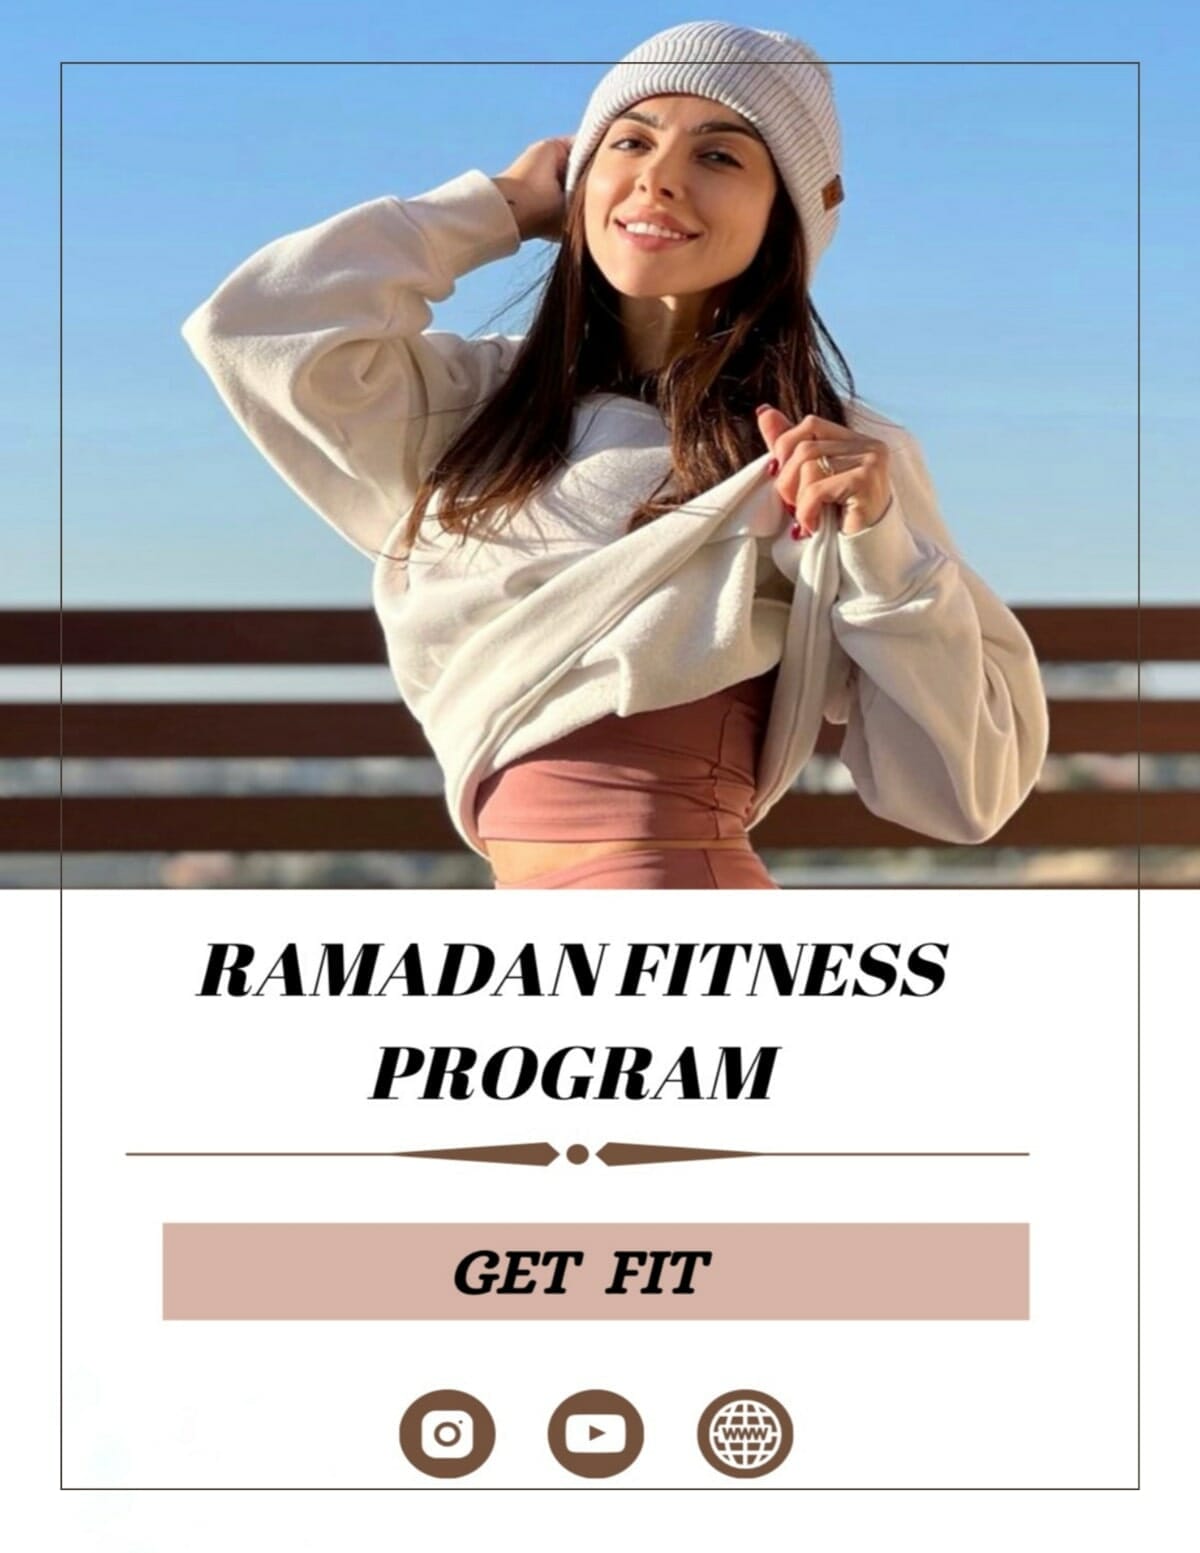 Ramadan Guide - Home Edition fitness program get fit.